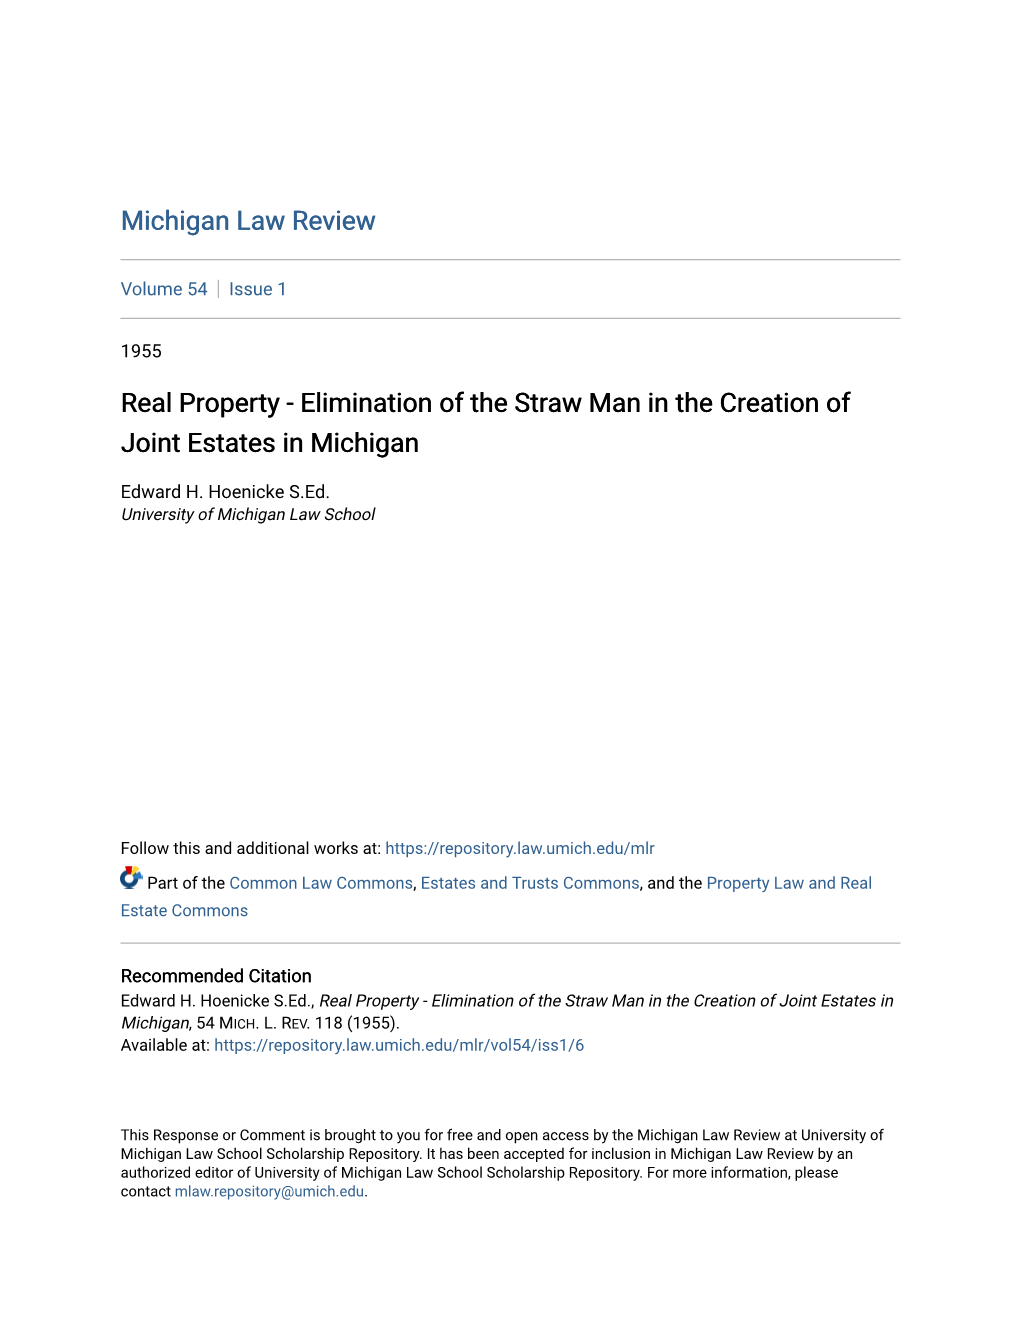 Real Property - Elimination of the Straw Man in the Creation of Joint Estates in Michigan